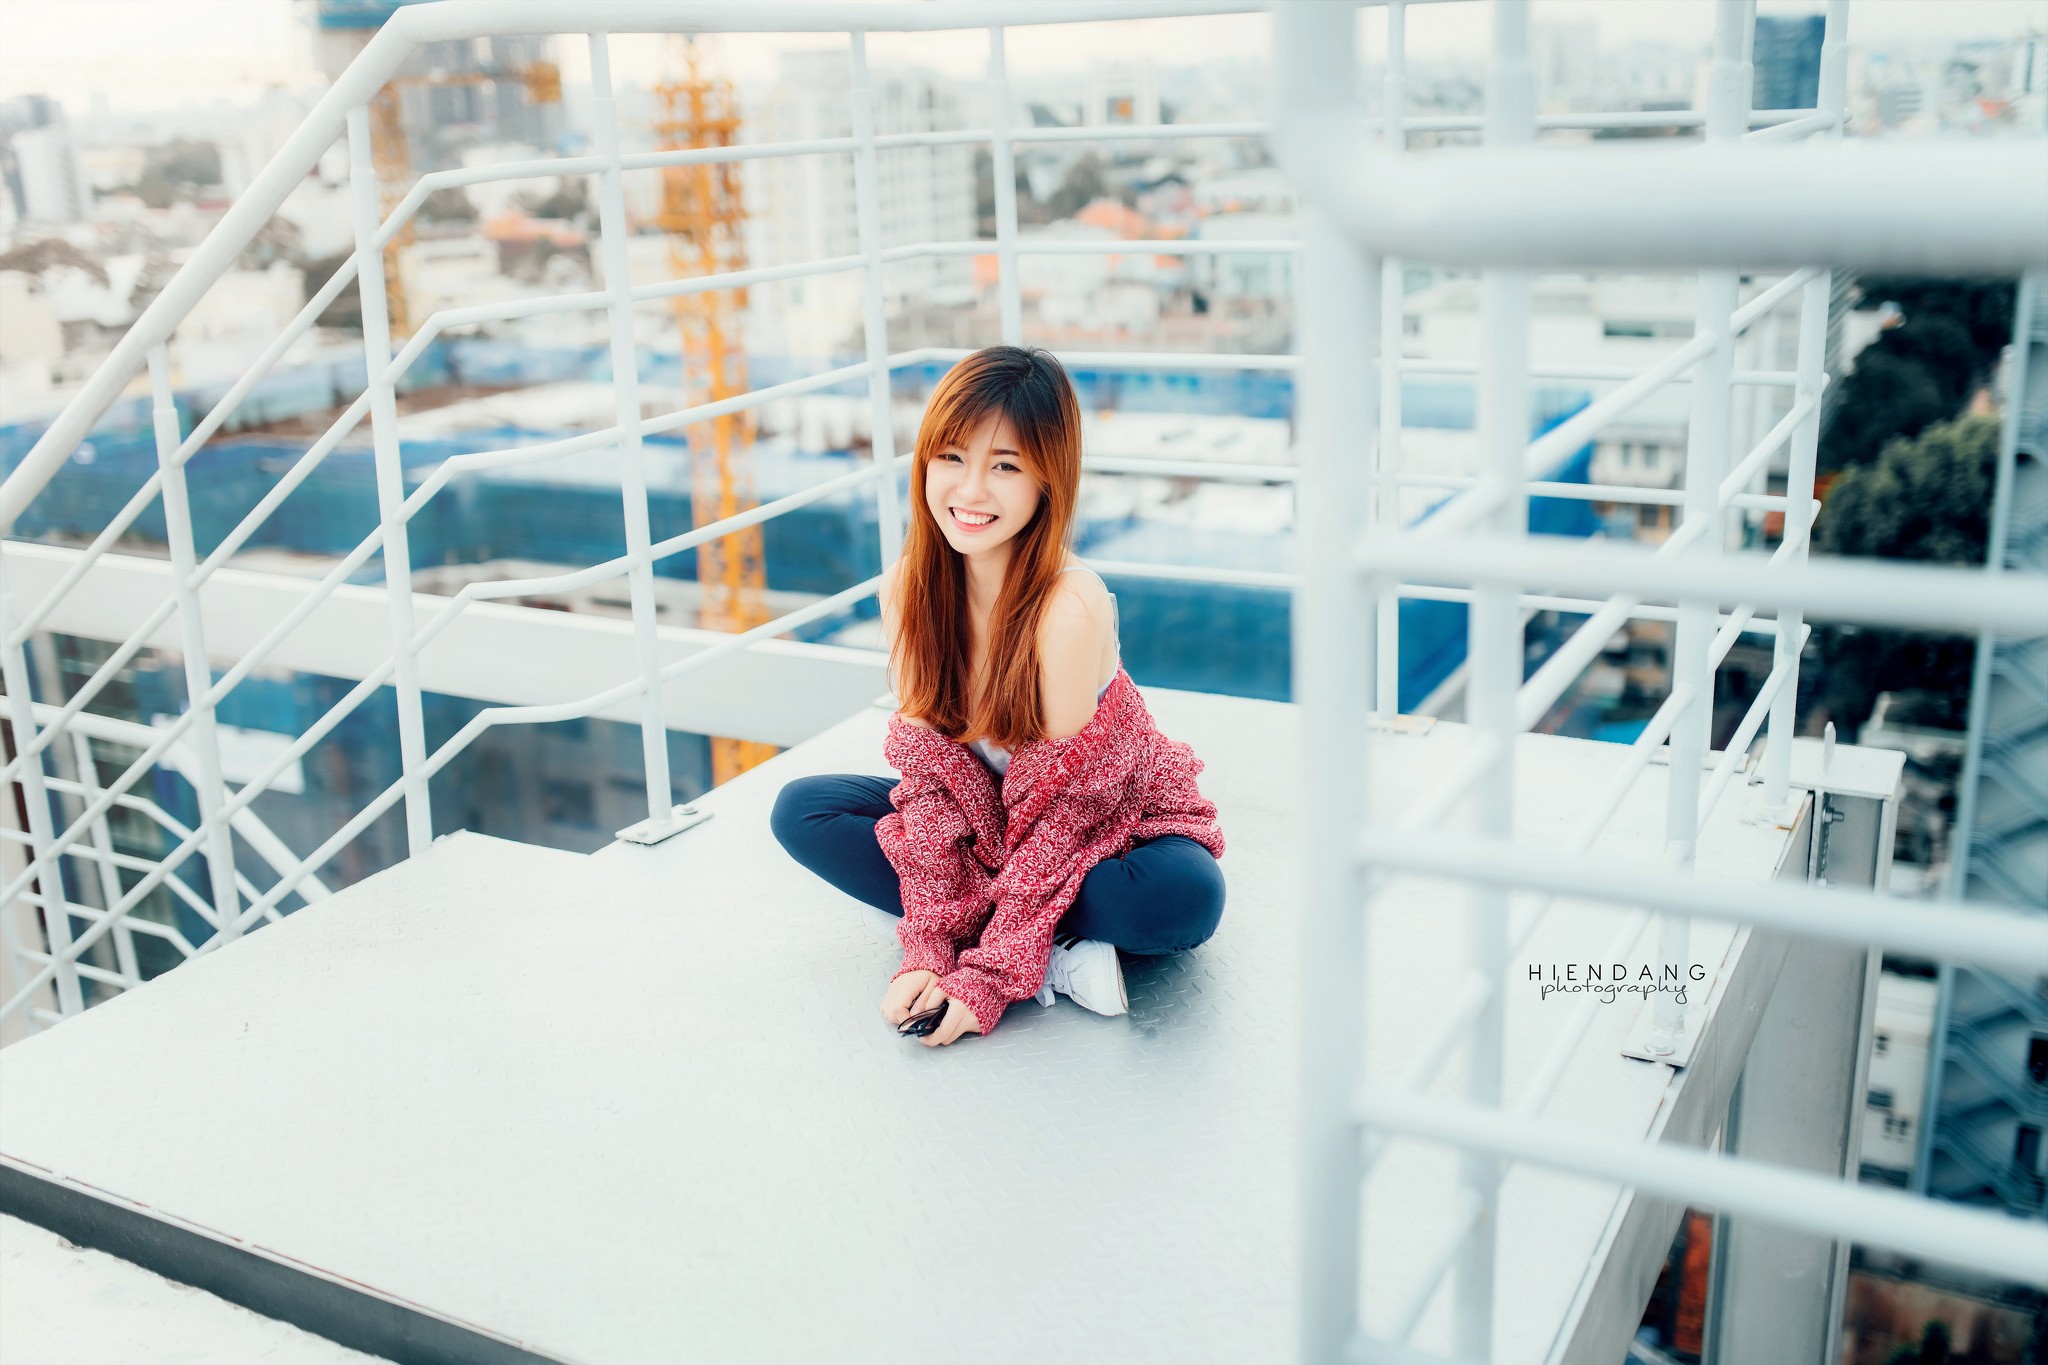 Asian Sweater Jeans Stairway Smiling Brunette White Shoes Depth Of Field 2048x1365